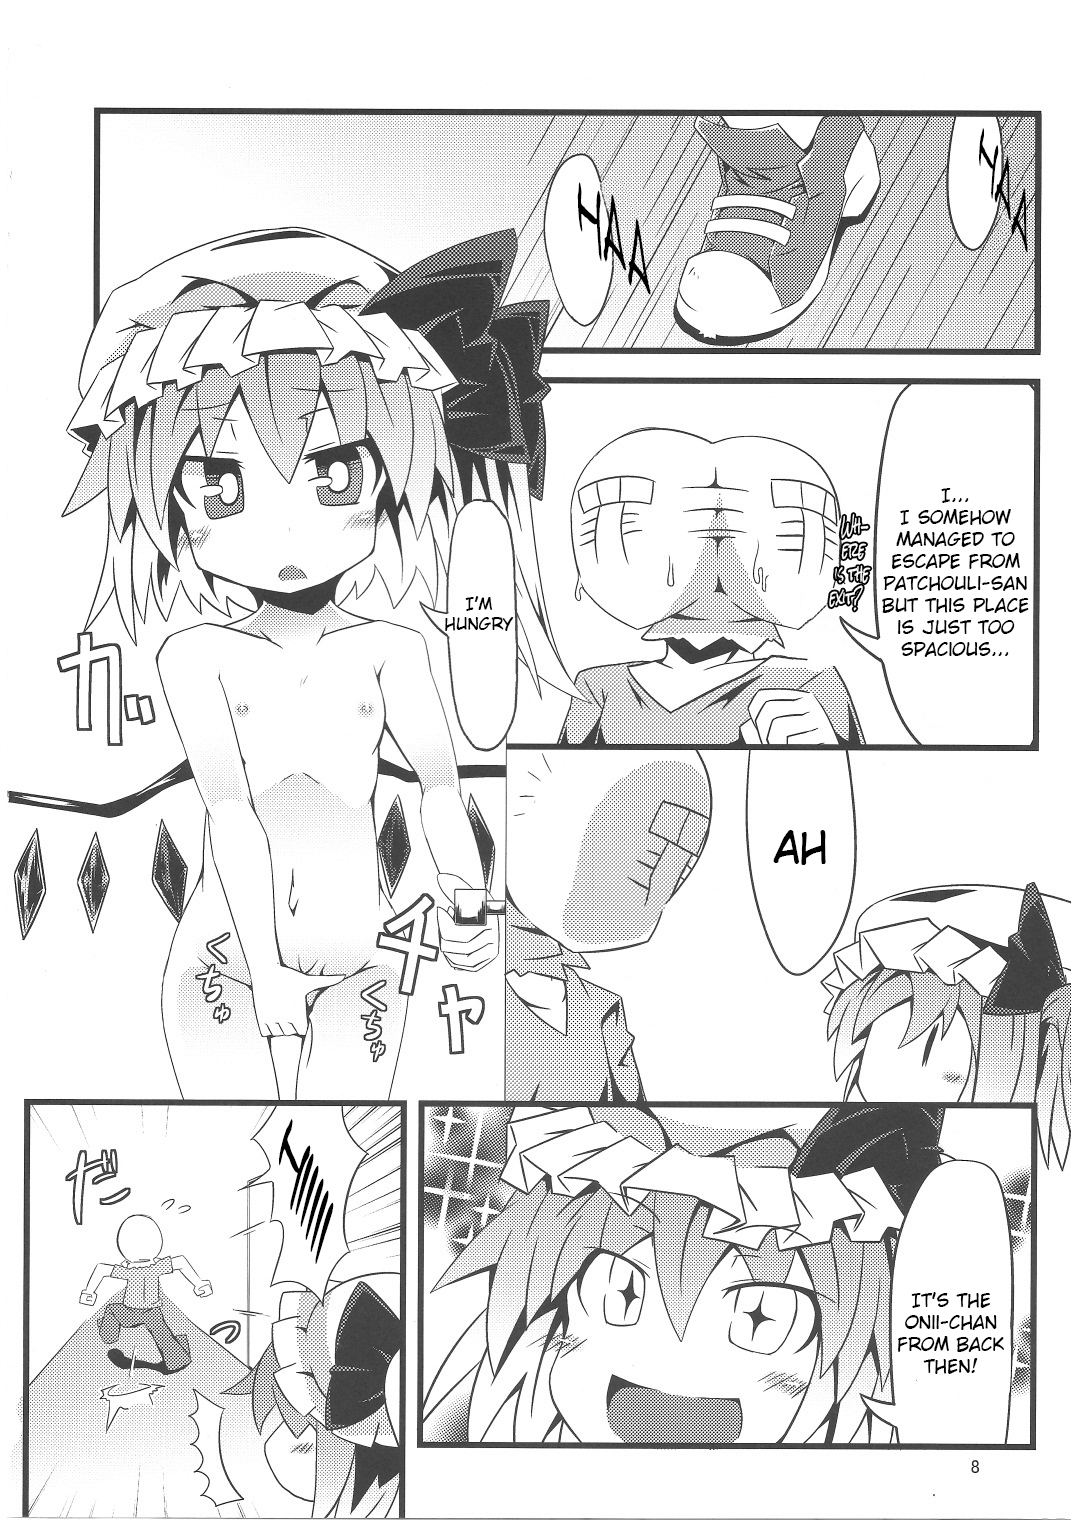 (Kouroumu 7) [Angelic Feather (Land Sale)] Tentacle Play (Touhou Project) [English] page 7 full